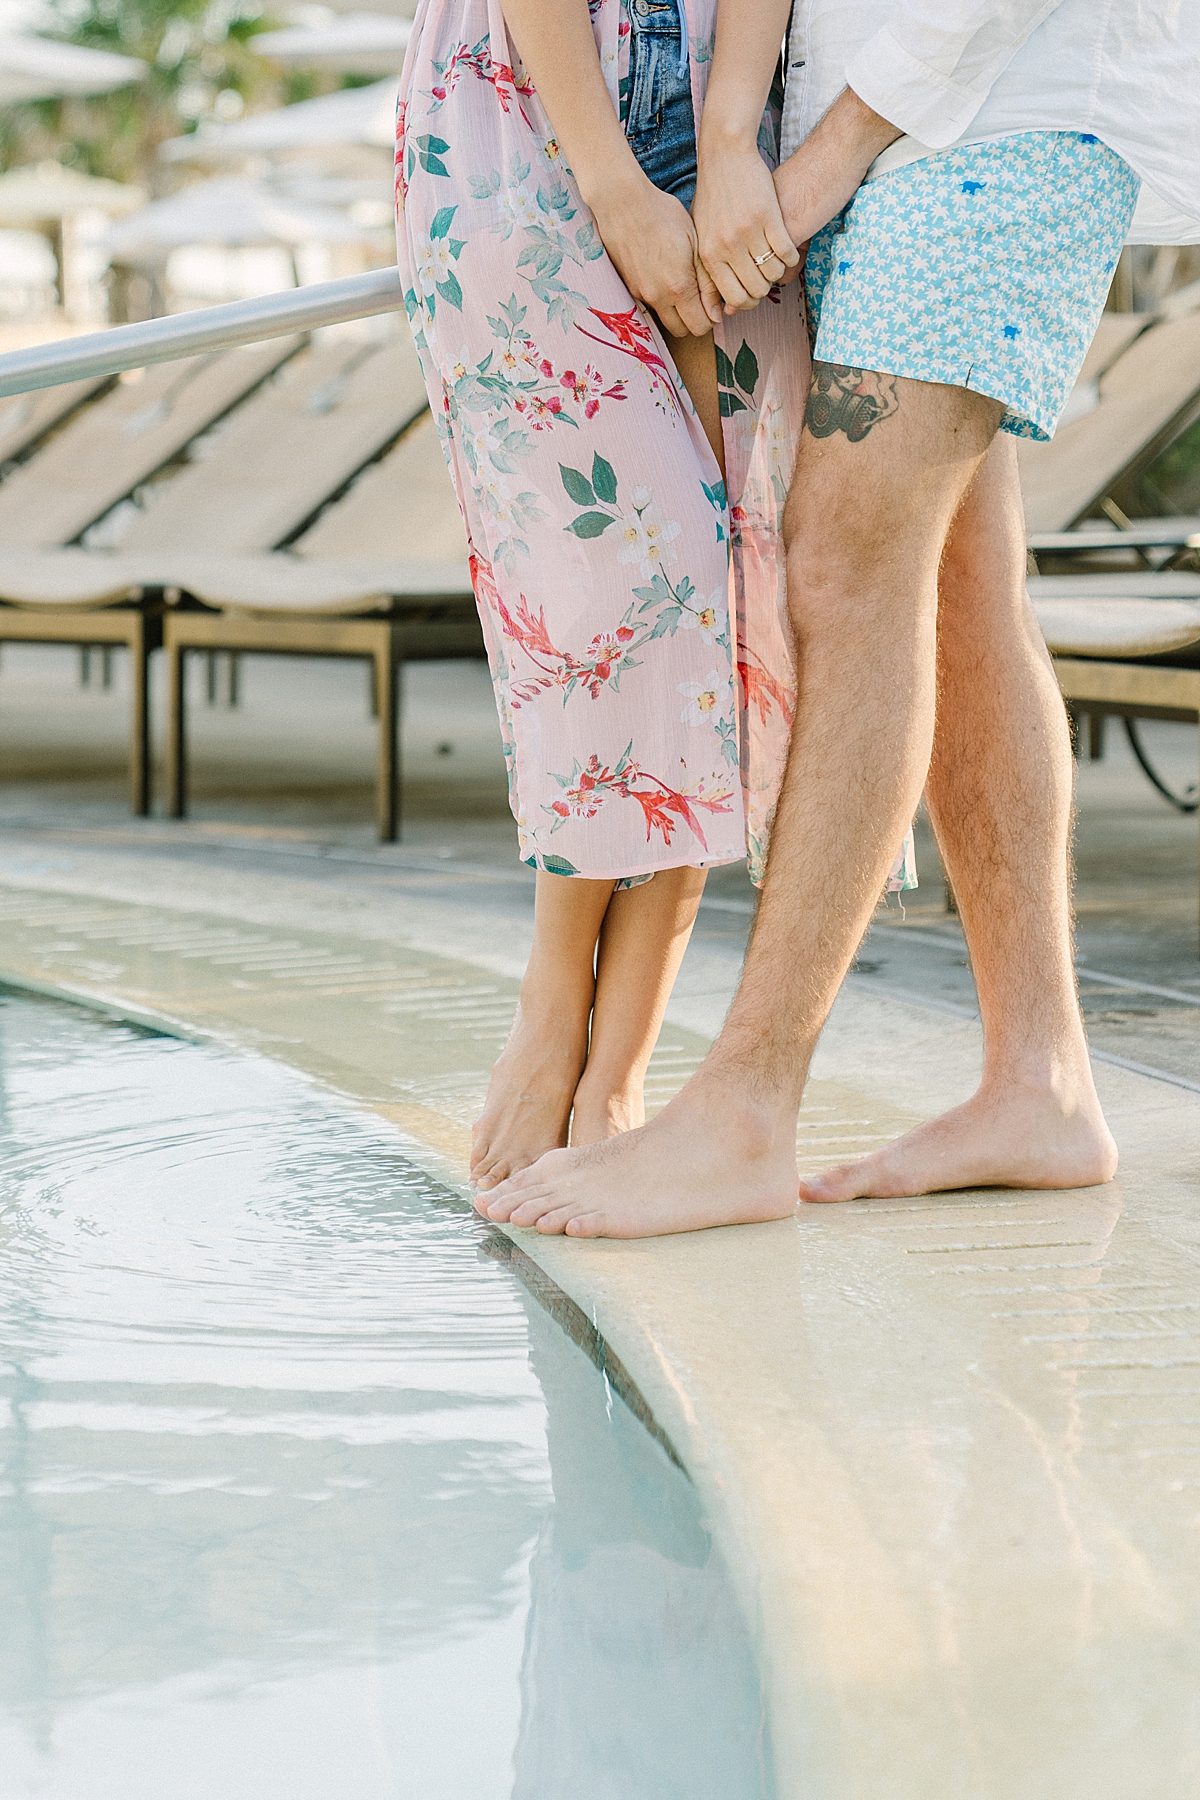 A couple dips their toes in the pool water.